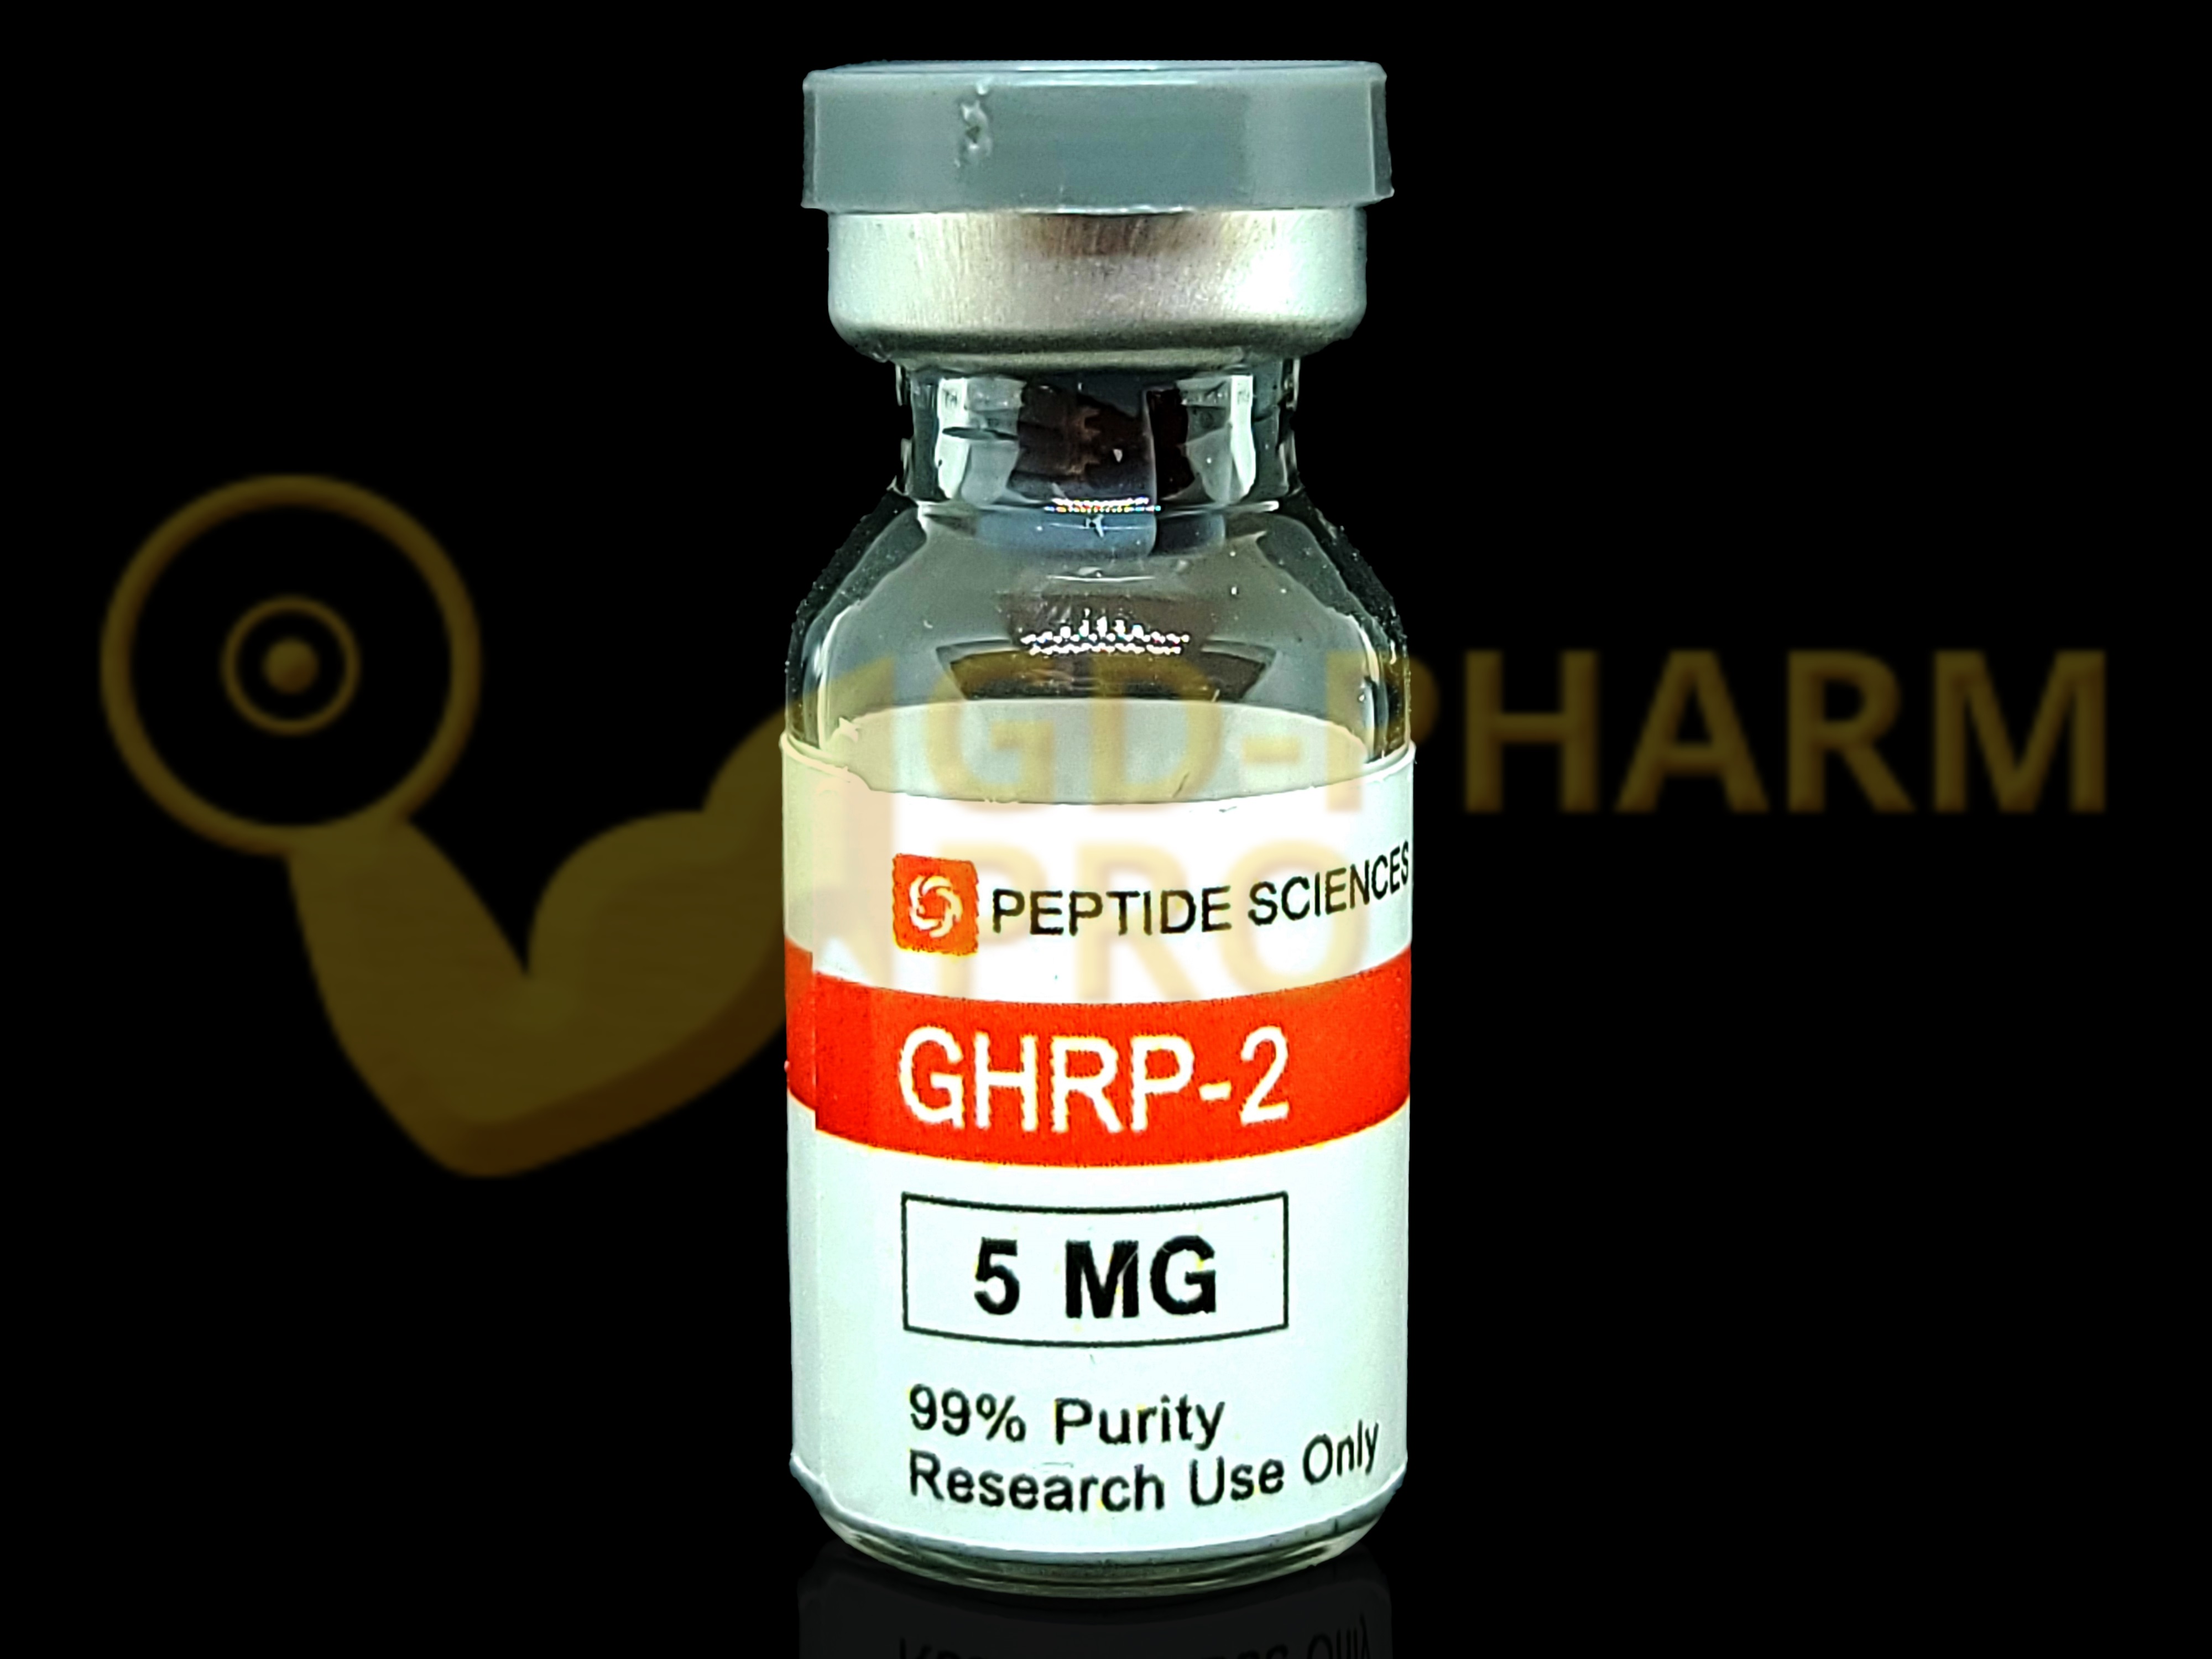 GHRP-2 Peptide Sciences